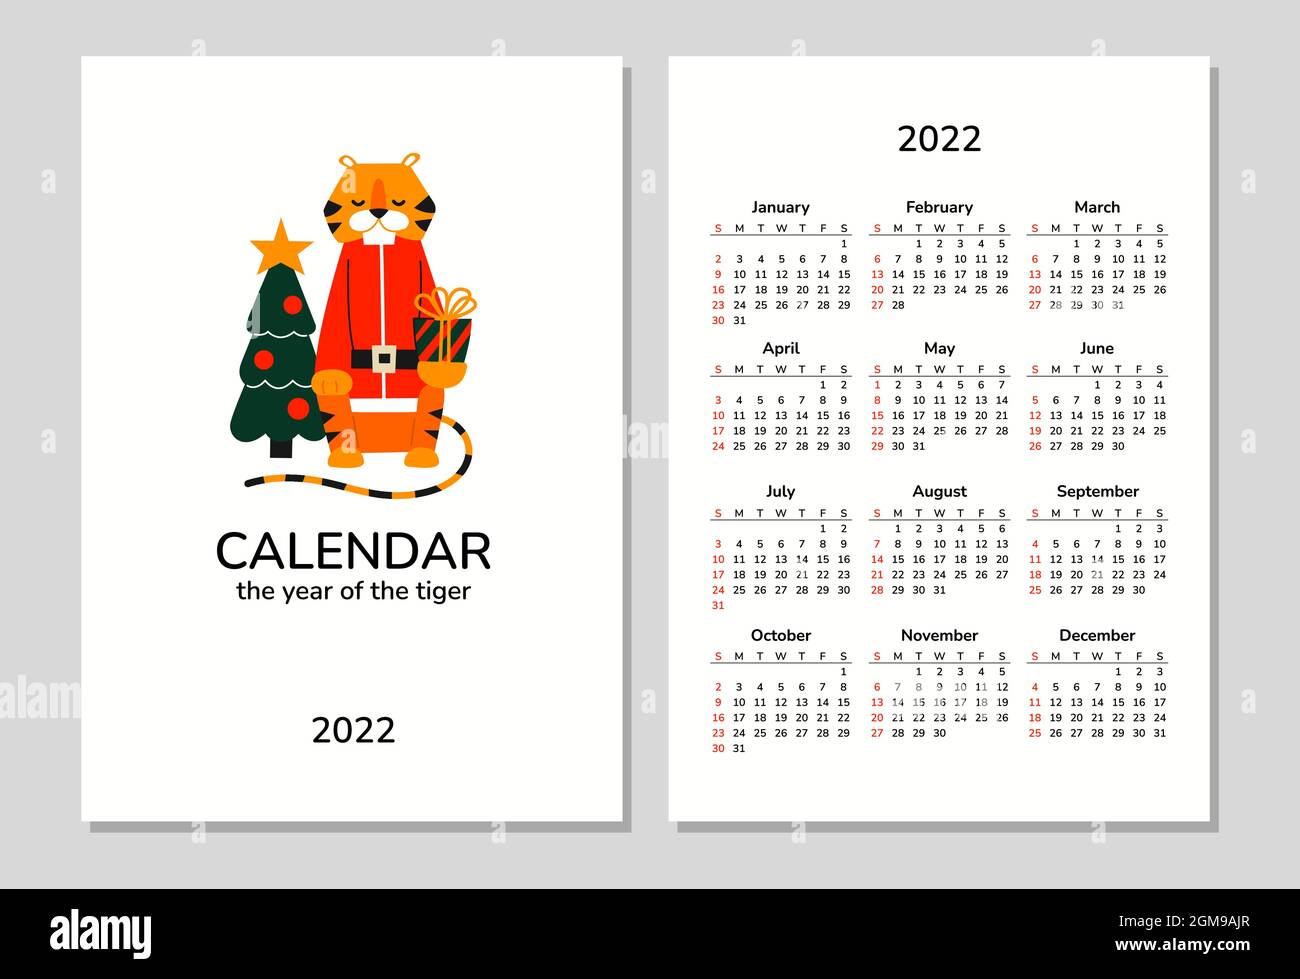 Christmas Calendar 2022 Calendar For 2022 With A Cute Tiger. Merry Christmas And Happy New Year.  Vector Isolated Illustration Of Tiger With Christmas Tree And Presents.  Santa Stock Vector Image & Art - Alamy